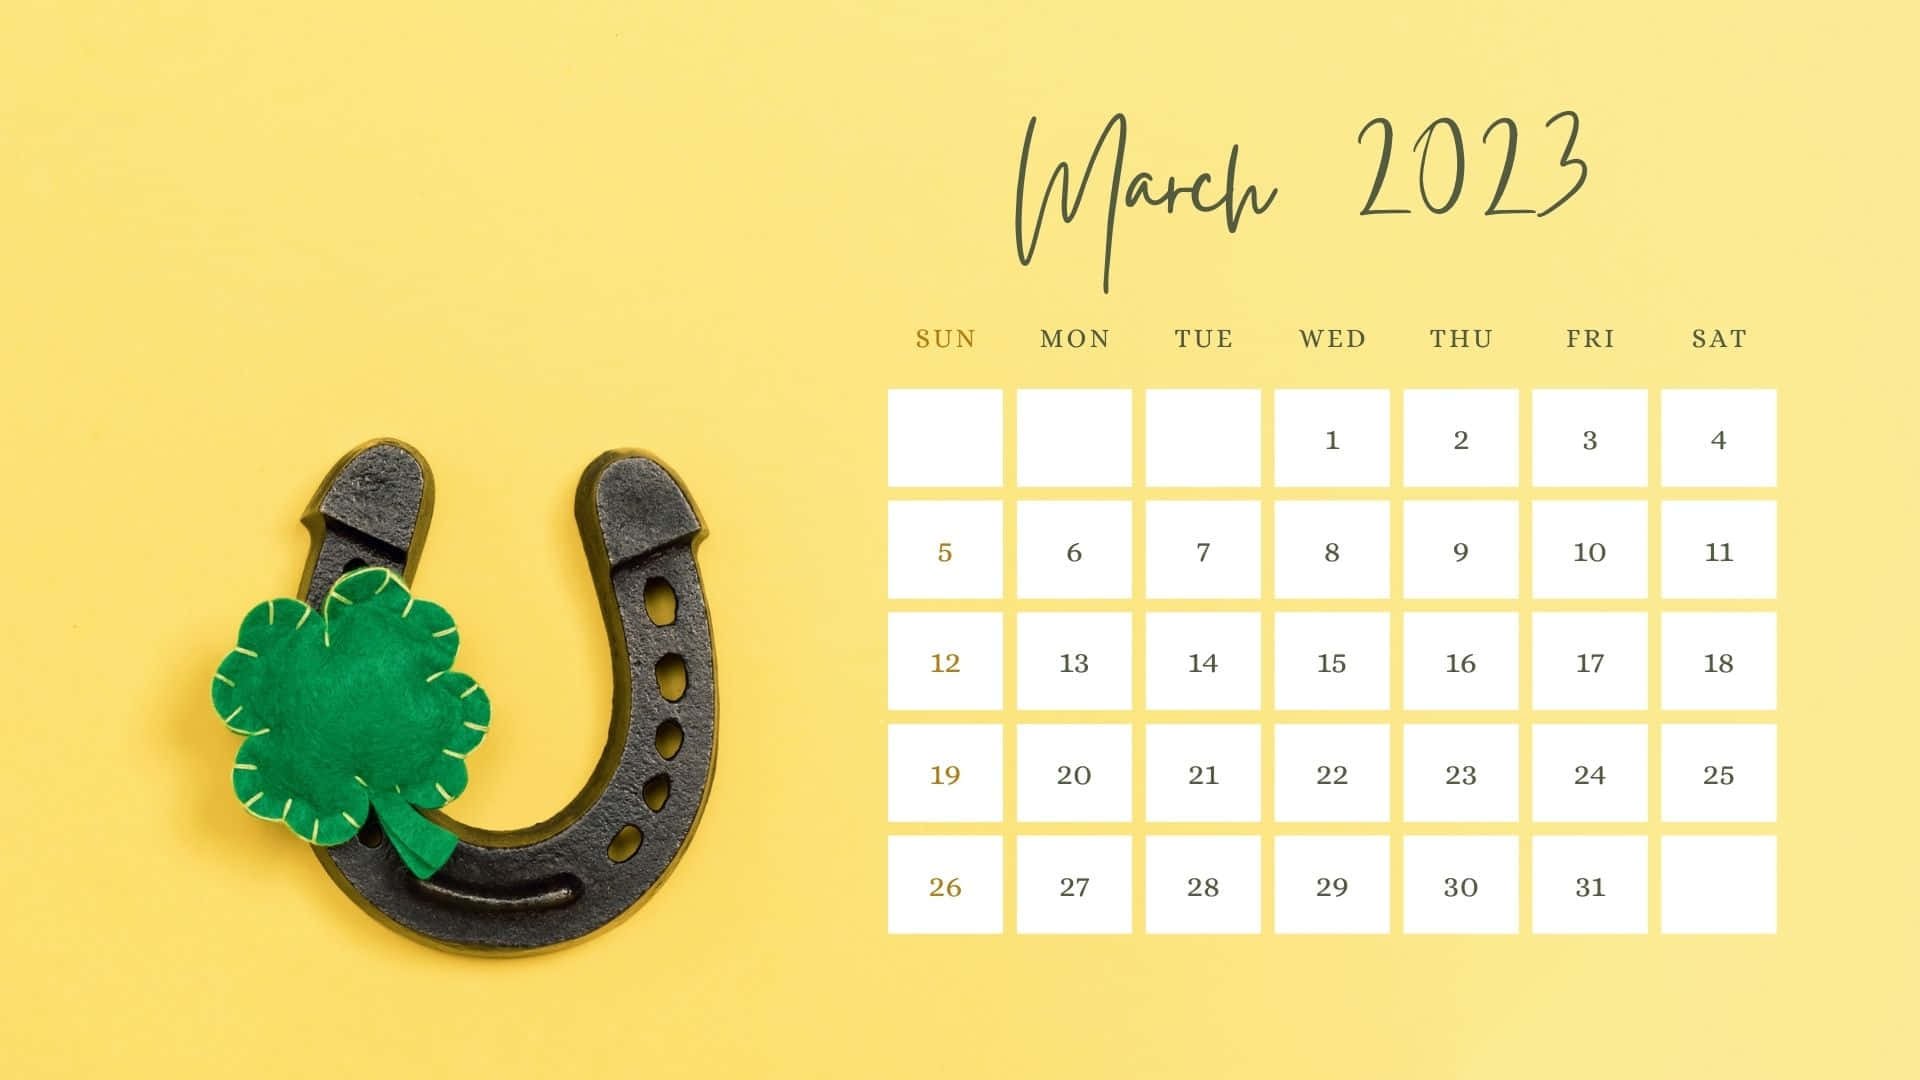 A Horseshoe Calendar With The Word St Patrick's Day Wallpaper